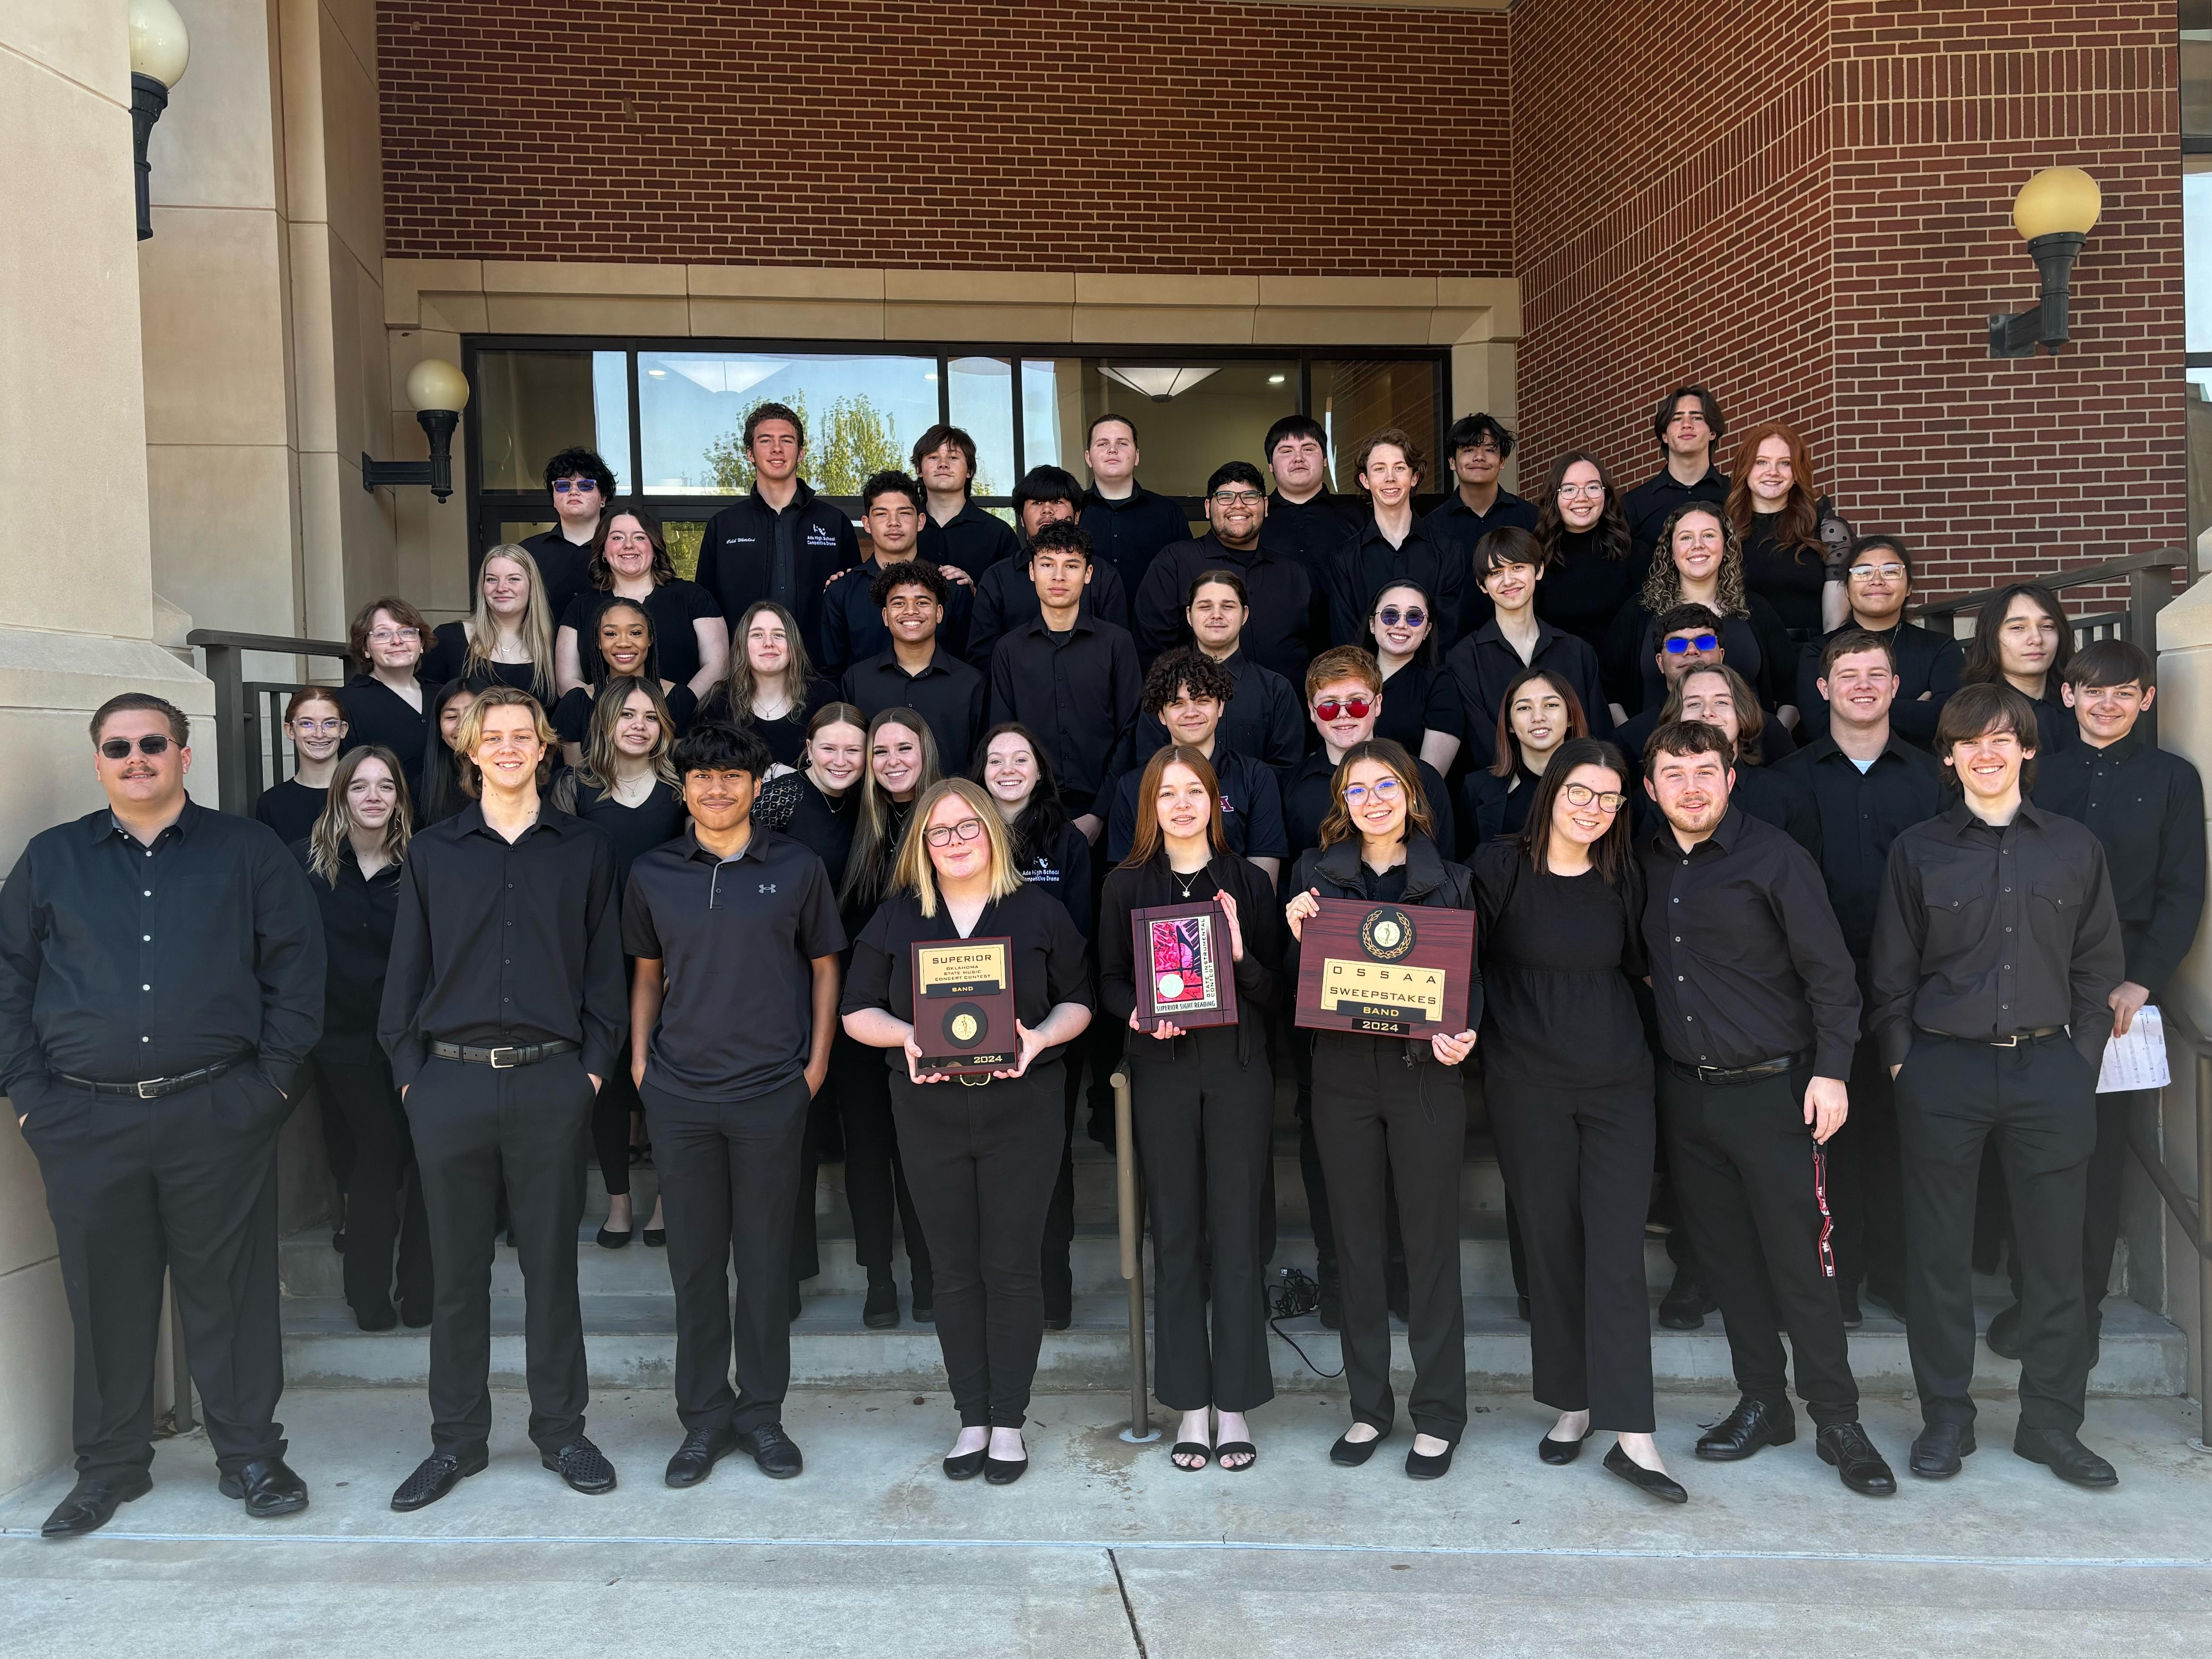 High School band students pose with awards